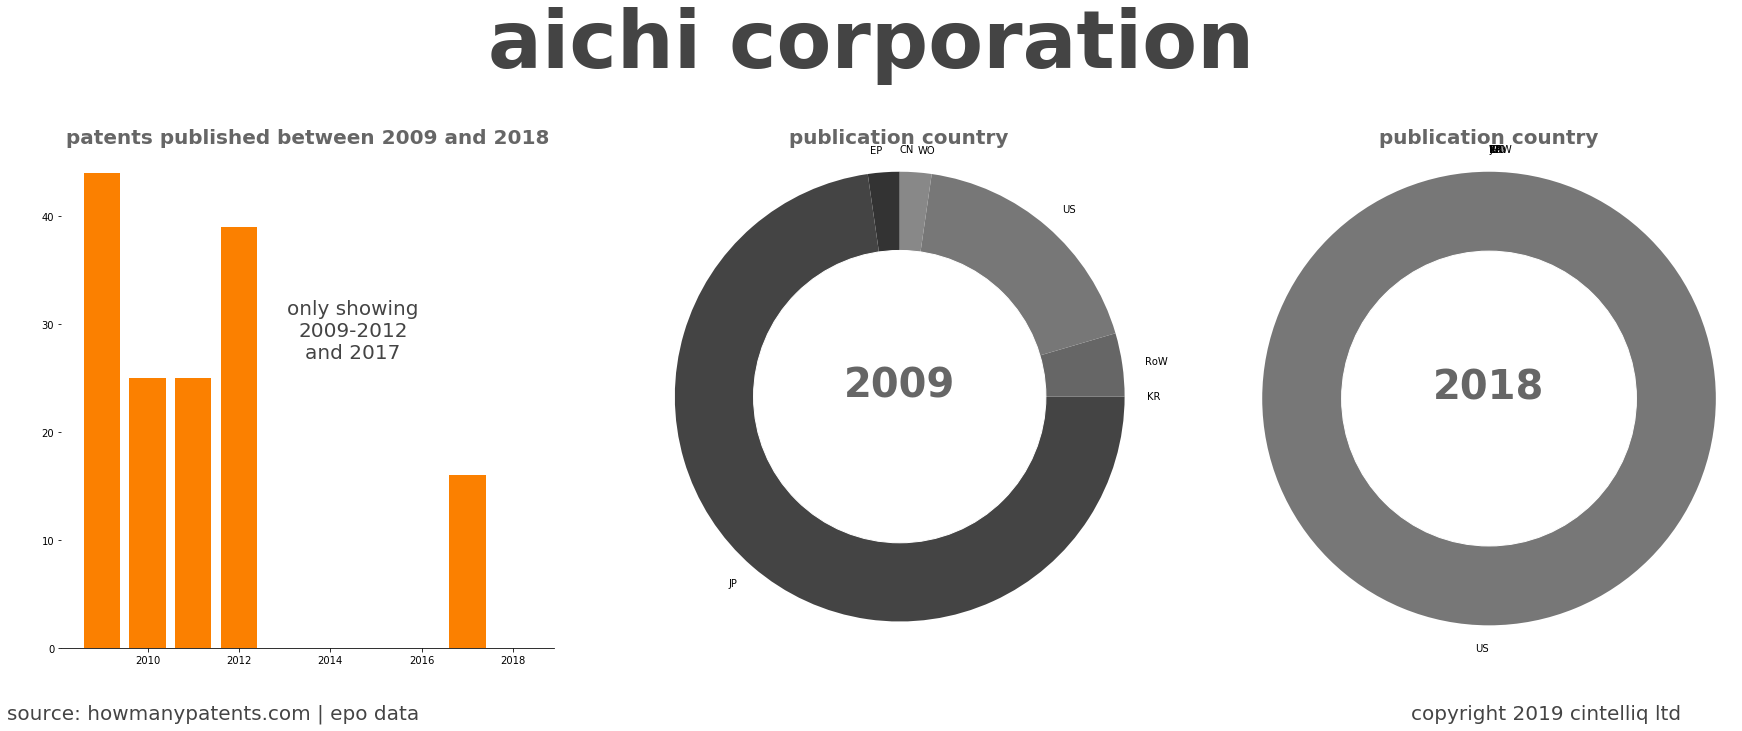 summary of patents for Aichi Corporation